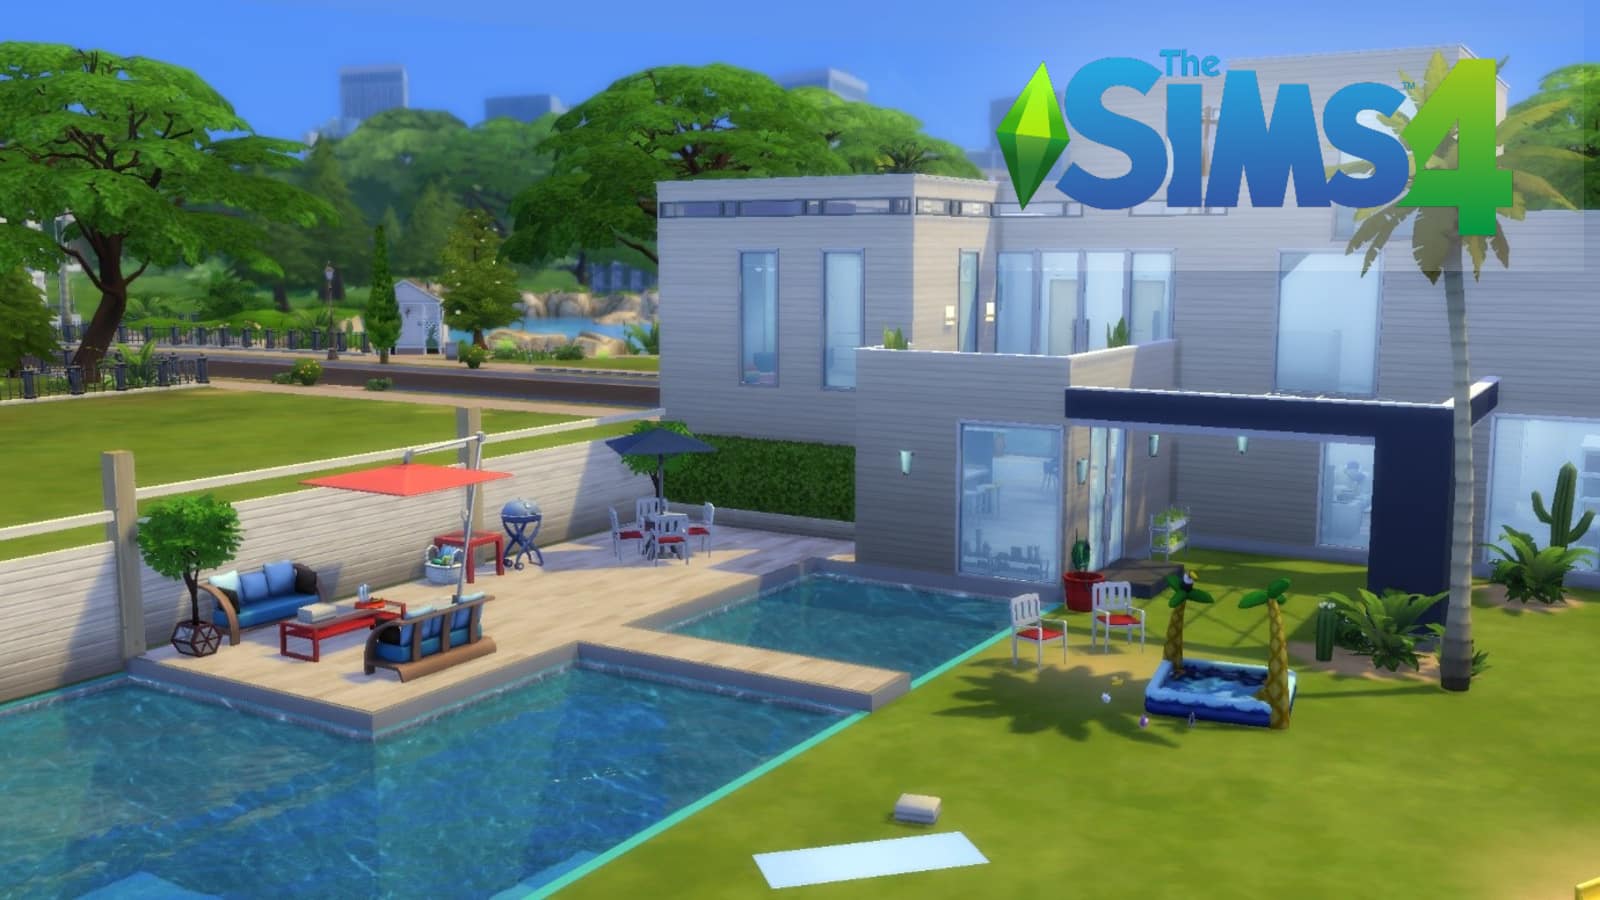 The Sims 4 Summer of Sims